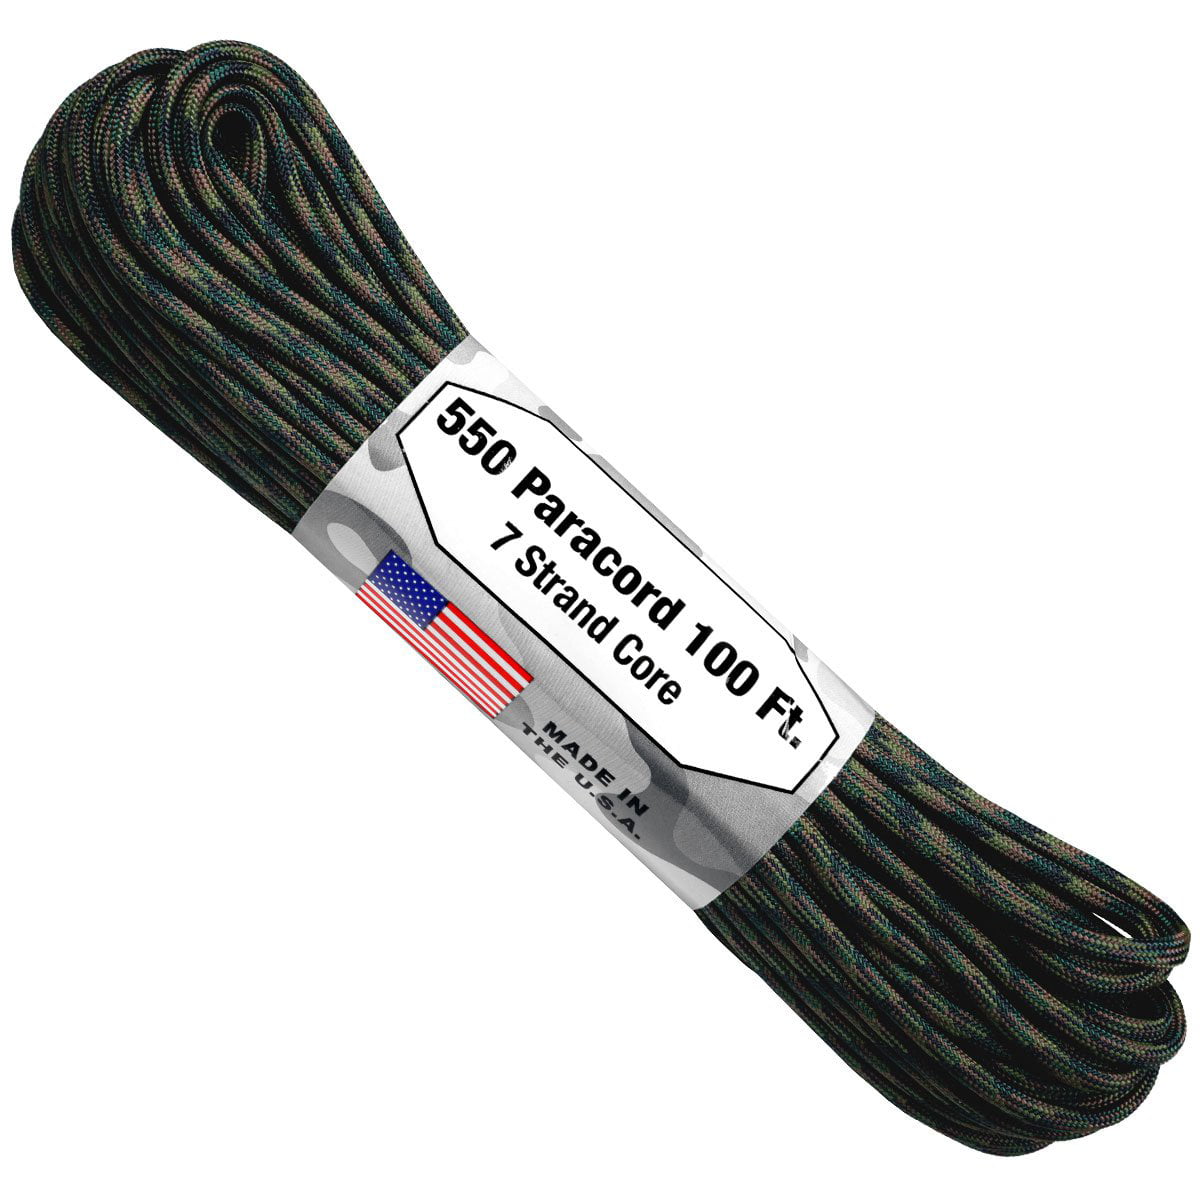 Wholesale 550 lb Paracord 100 ft strand MADE IN USA Camo MilSpec Foliage 